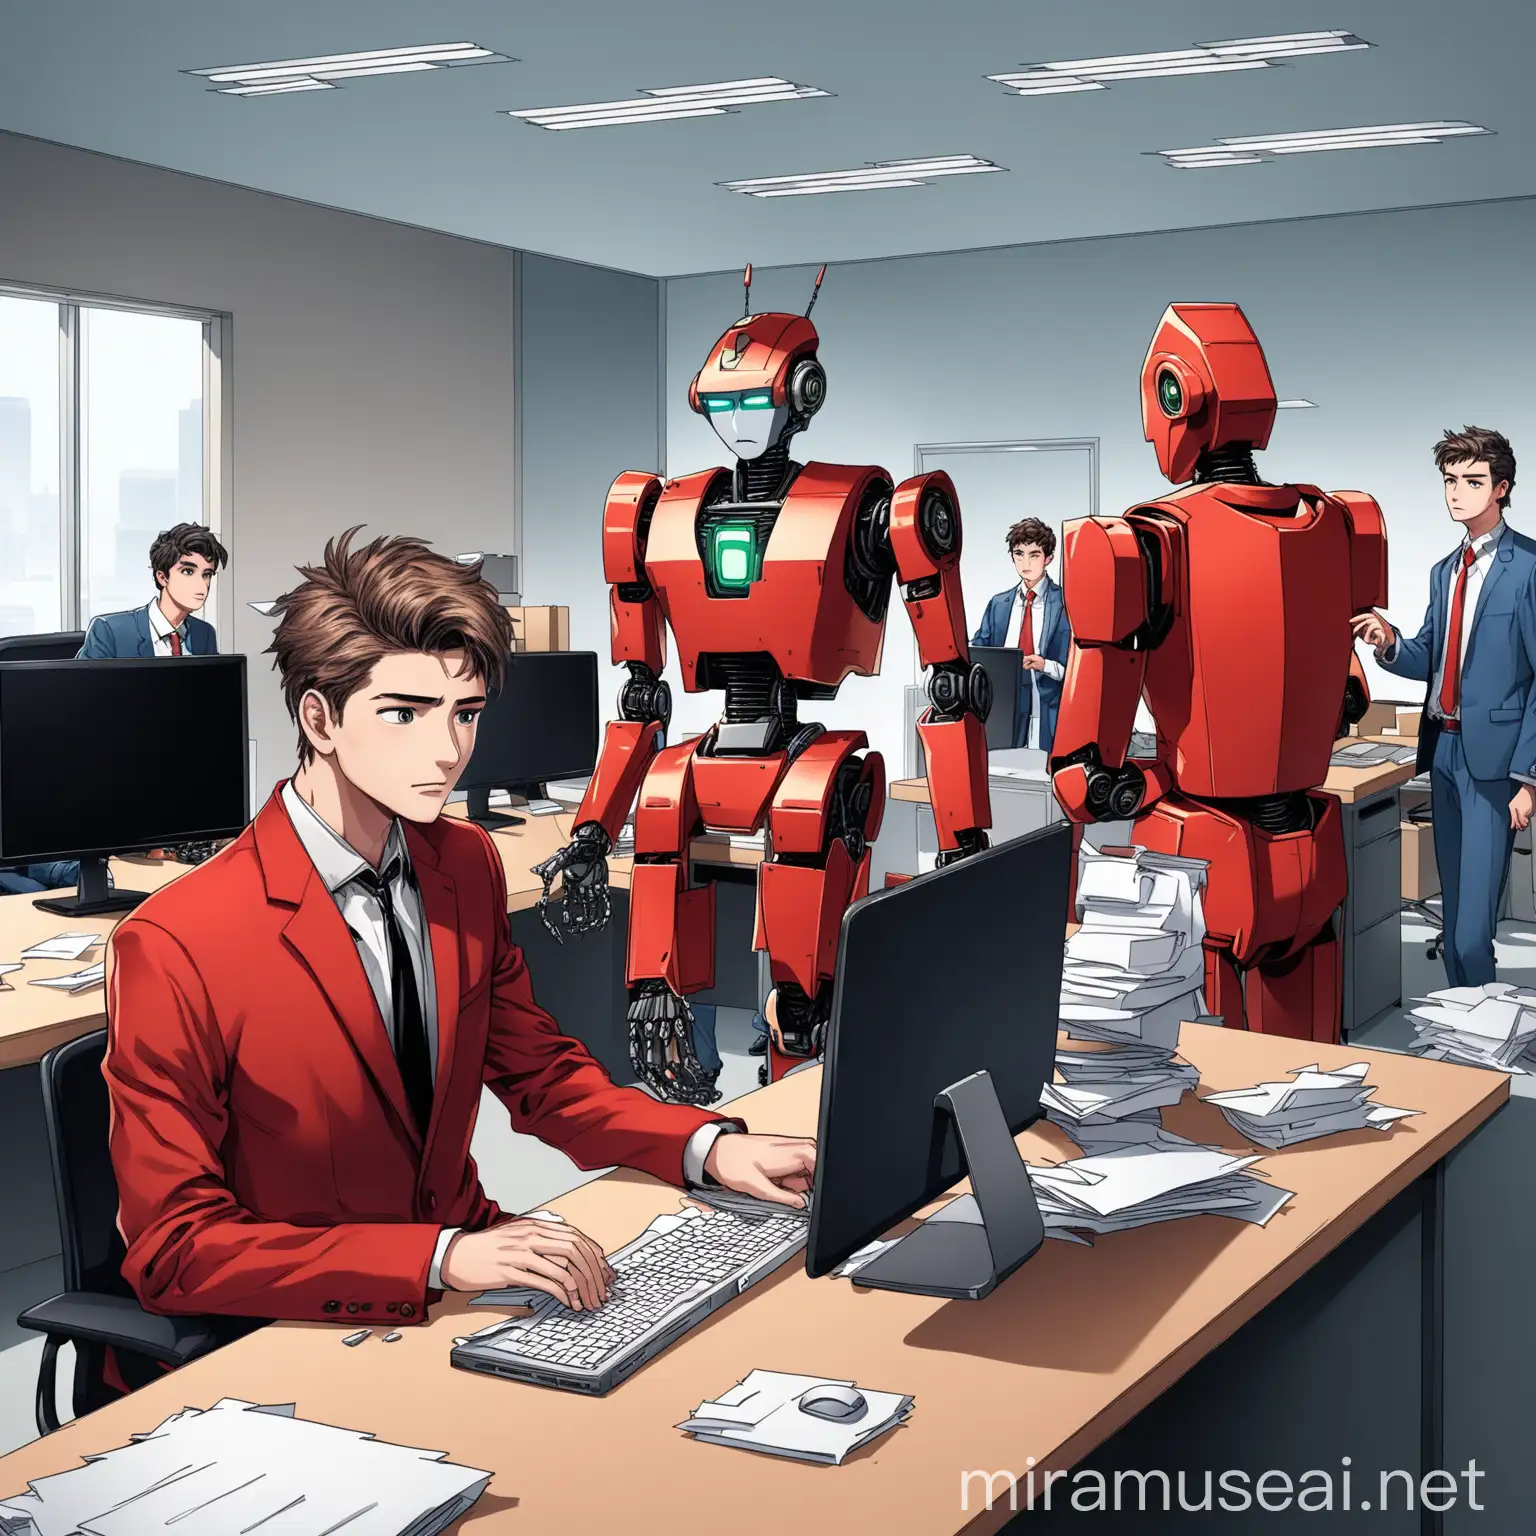 Robots sit at the desk in the office and work on the computer.
The employees pack up and are evicted from the office.
The 20-year-old handsome man watches the situation.
The 20-year-old handsome man is wearing a red suit set.